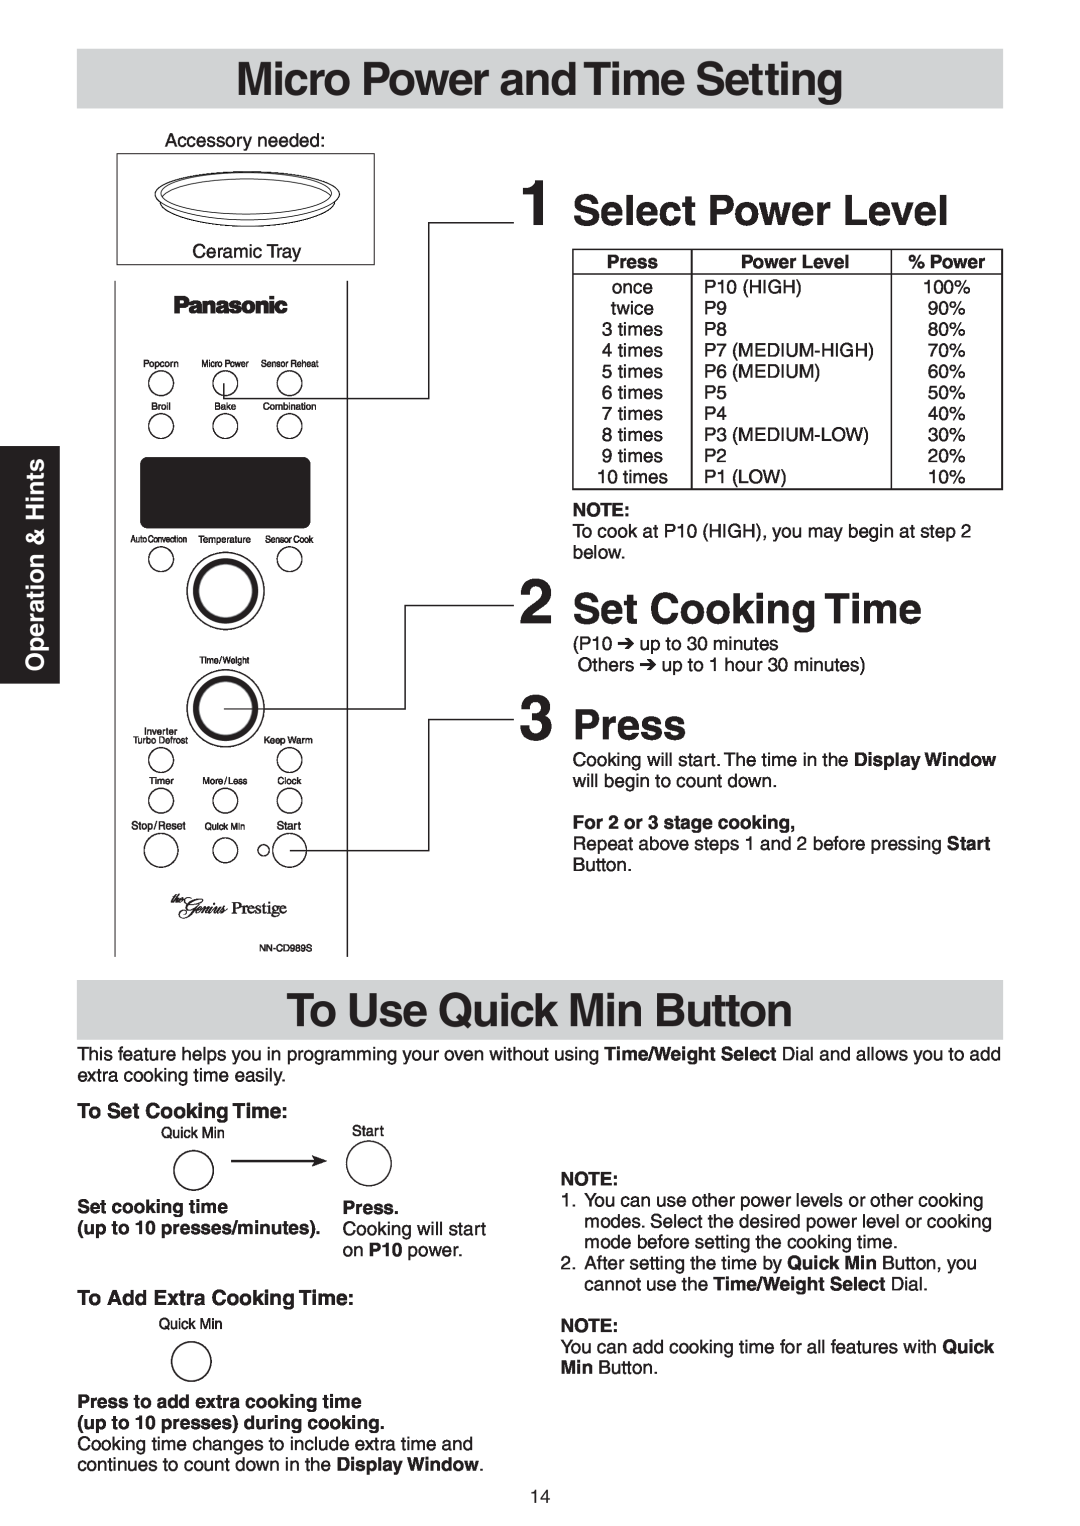 Panasonic NN-CD989S Micro Power and Time Setting, To Use Quick Min Button, Select Power Level, Set Cooking Time, Press 